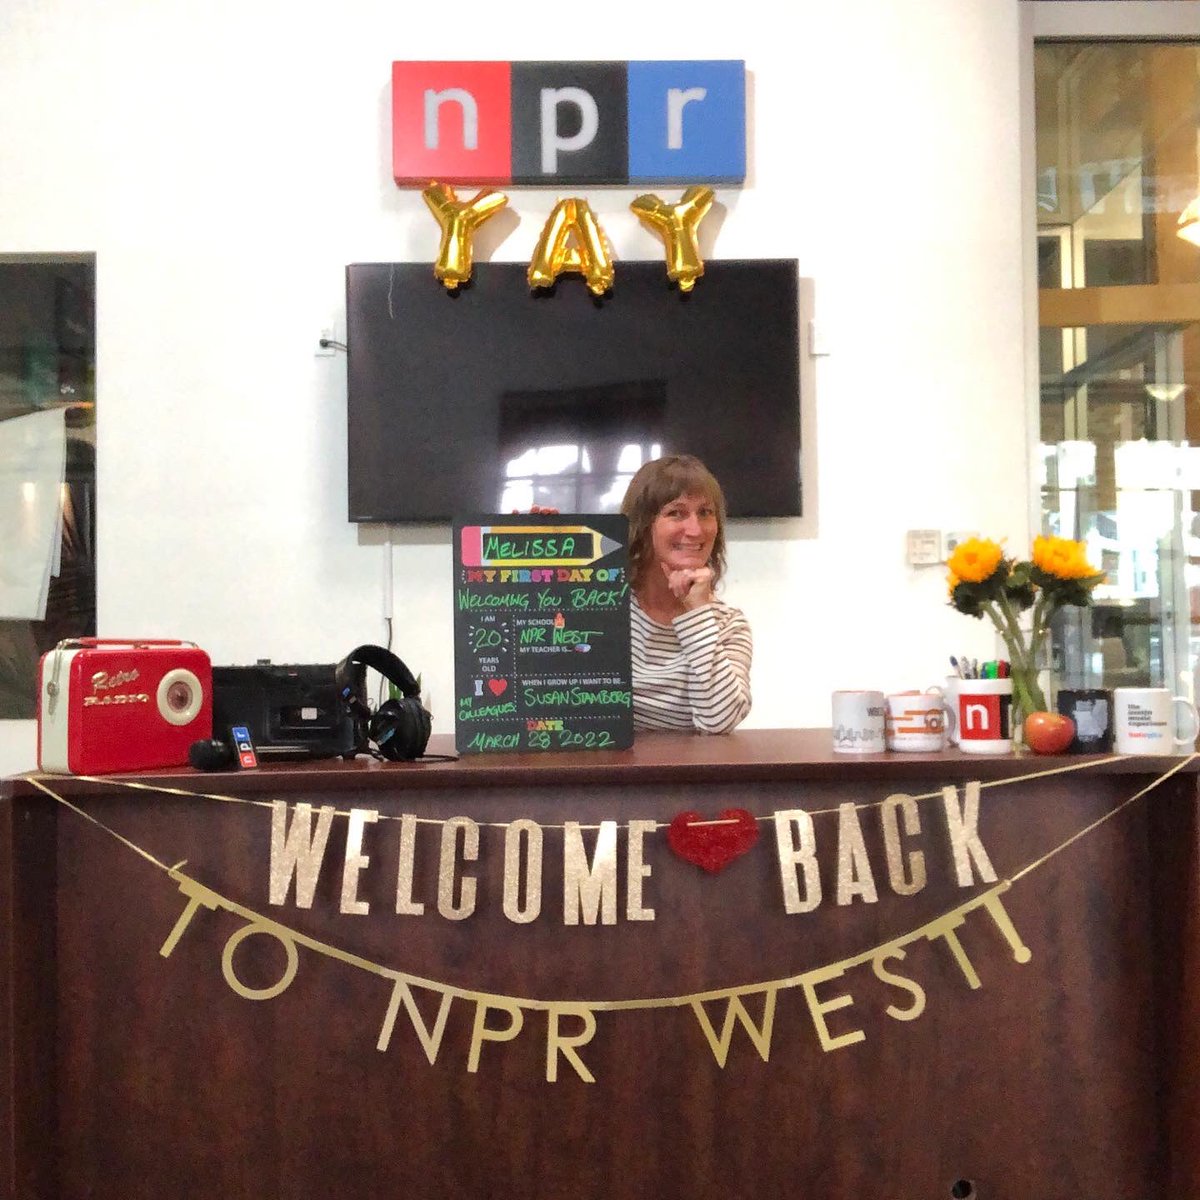 Hello, I set up a photo booth to welcome you back to NPR West. #NPRLife